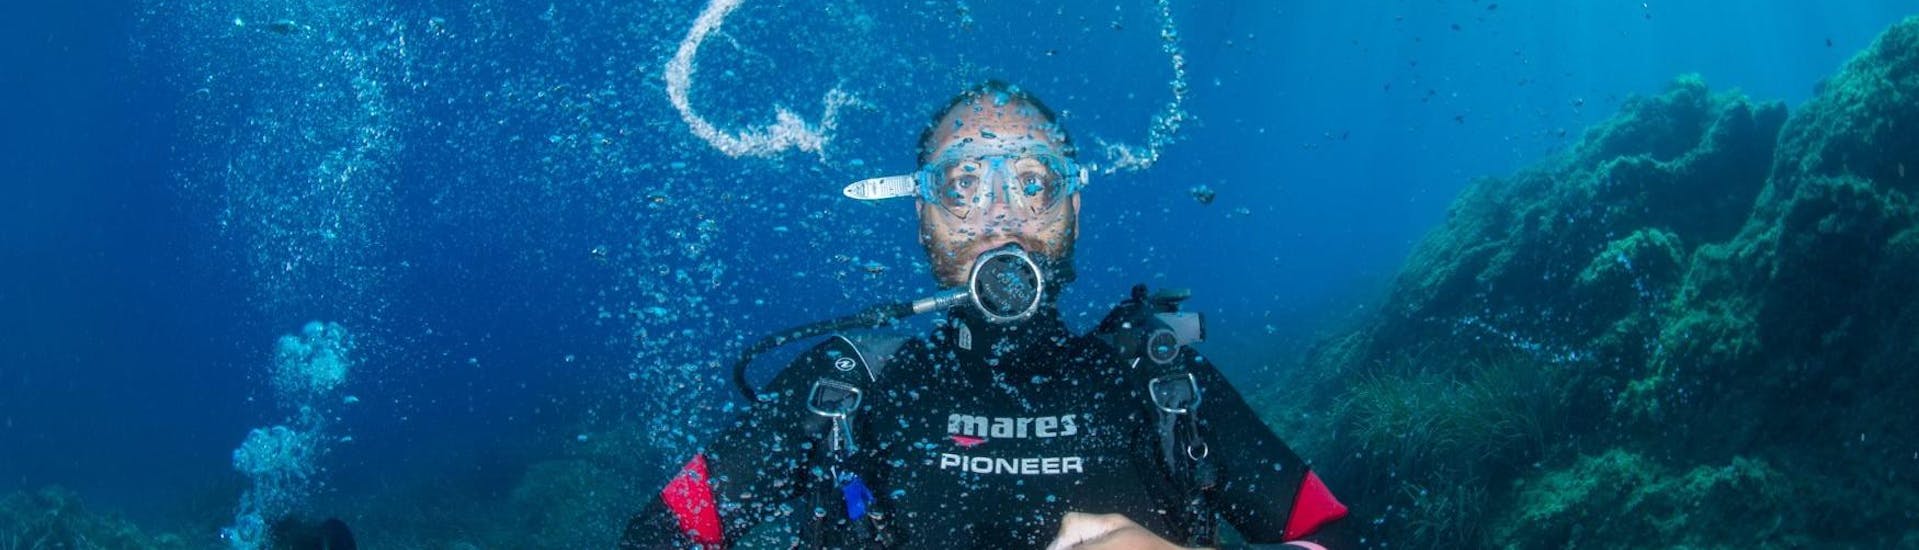 Diver making bubbles in the water during his Trial Scuba Diving in Sainte-Maxime with H2O Sainte-Maxime.